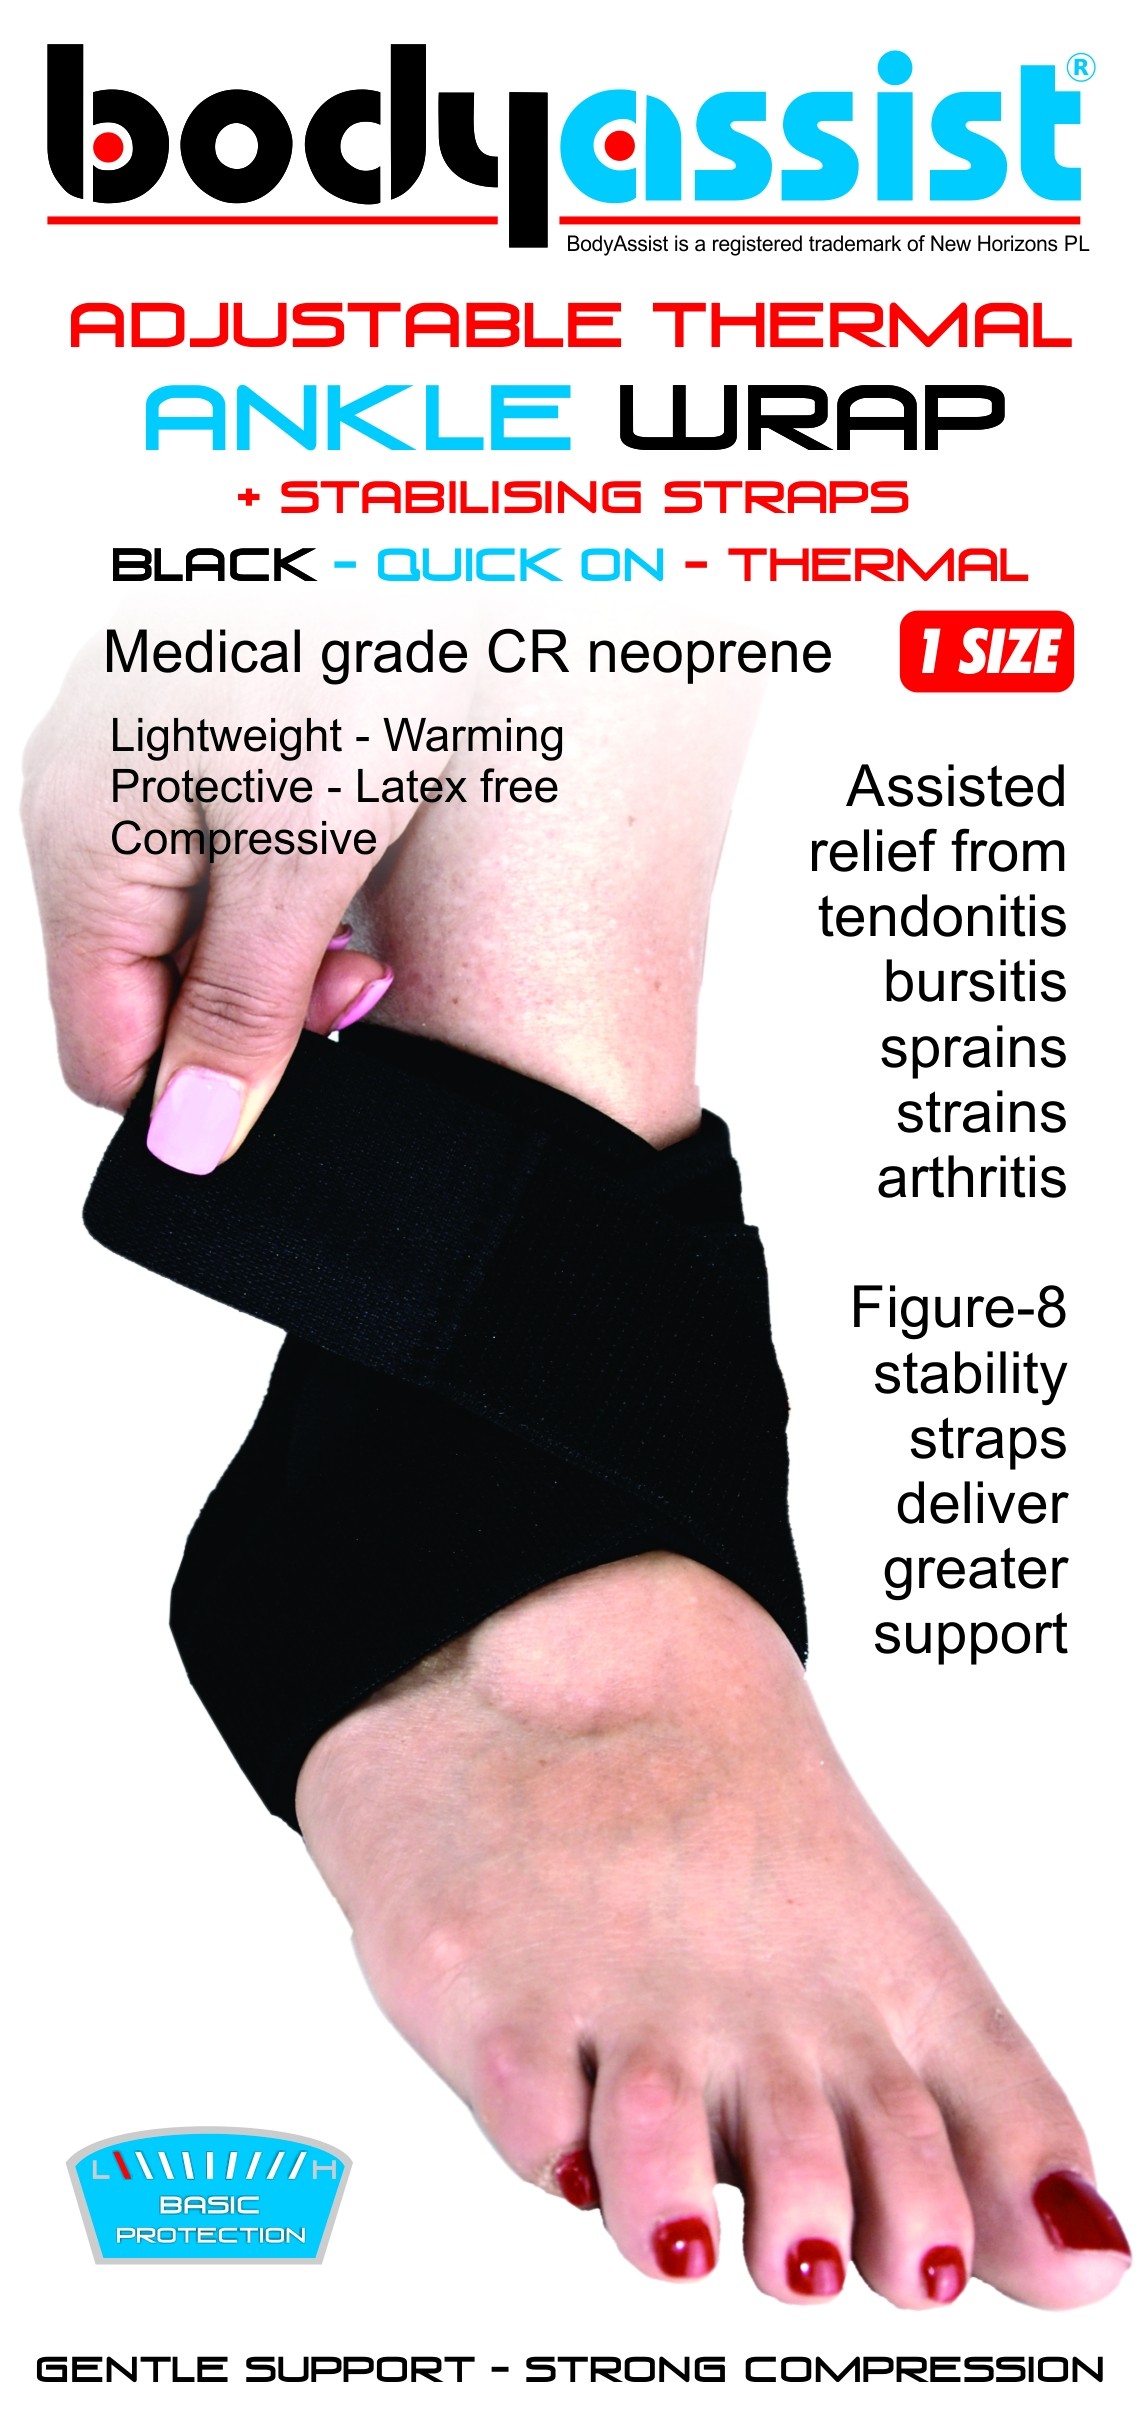 BA One Size Thermal Ankle Wrap with stabilzer straps